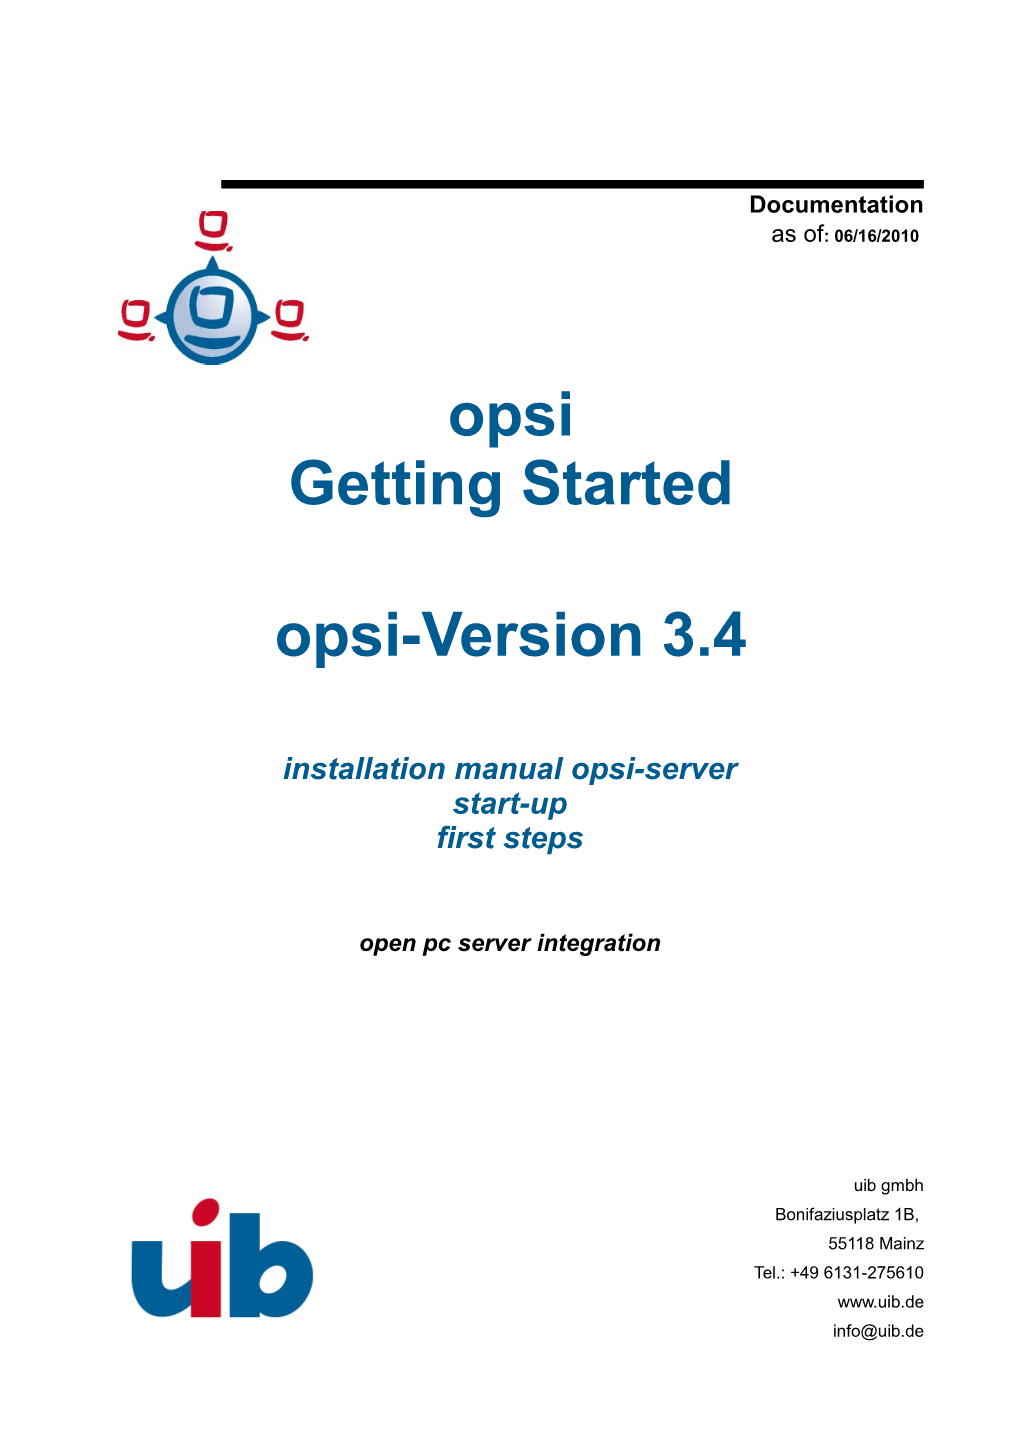 Opsi Getting Started Opsi-Version 3.4